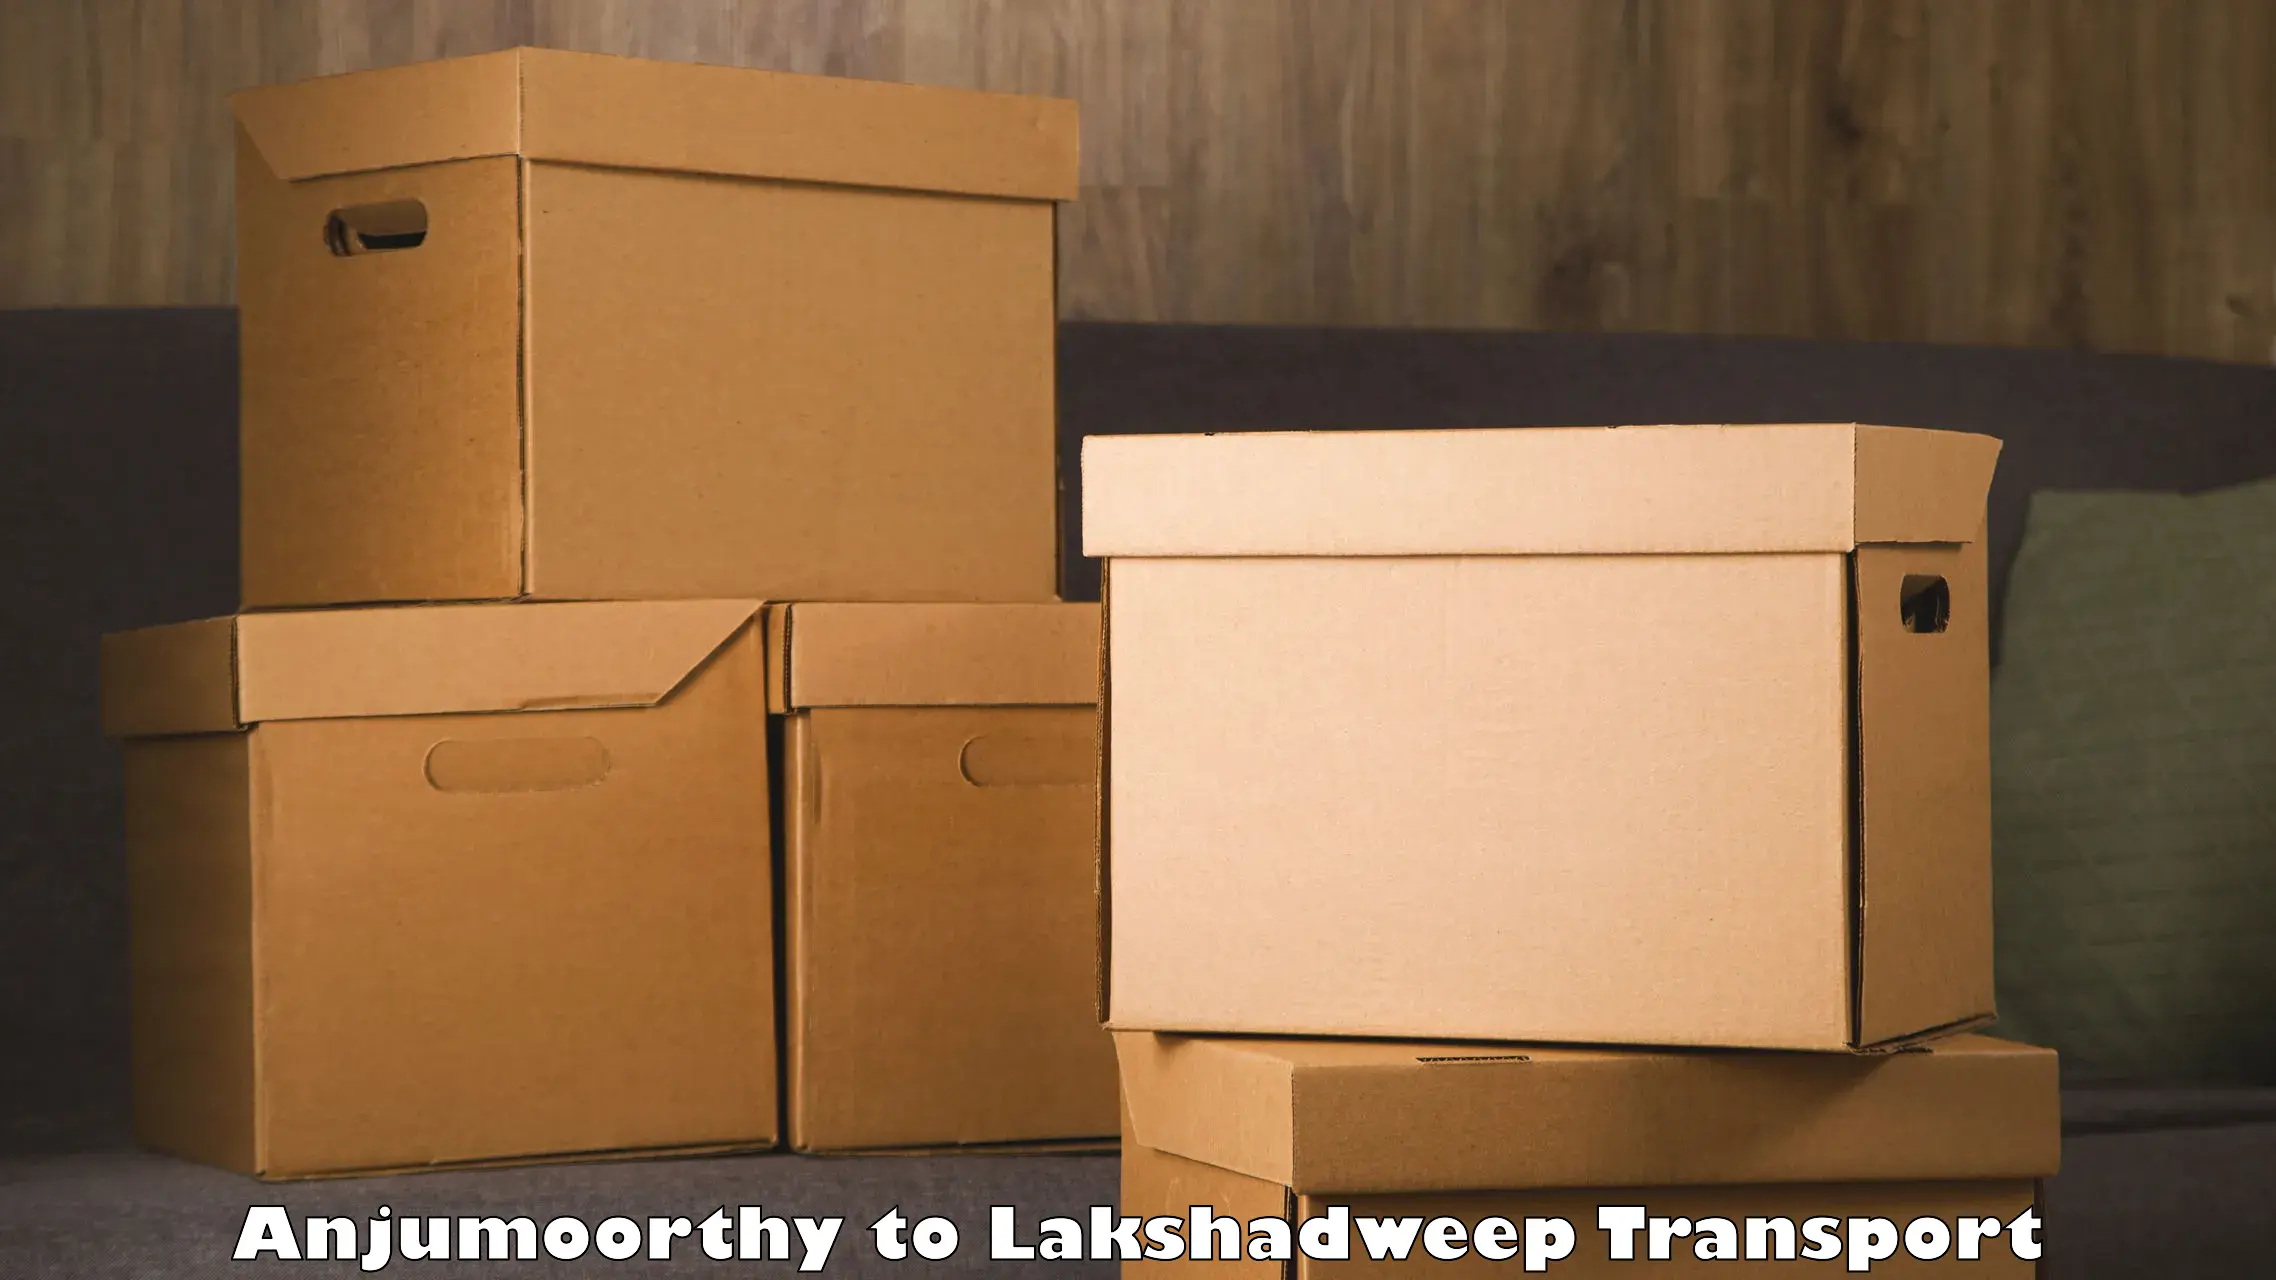 Container transport service Anjumoorthy to Lakshadweep